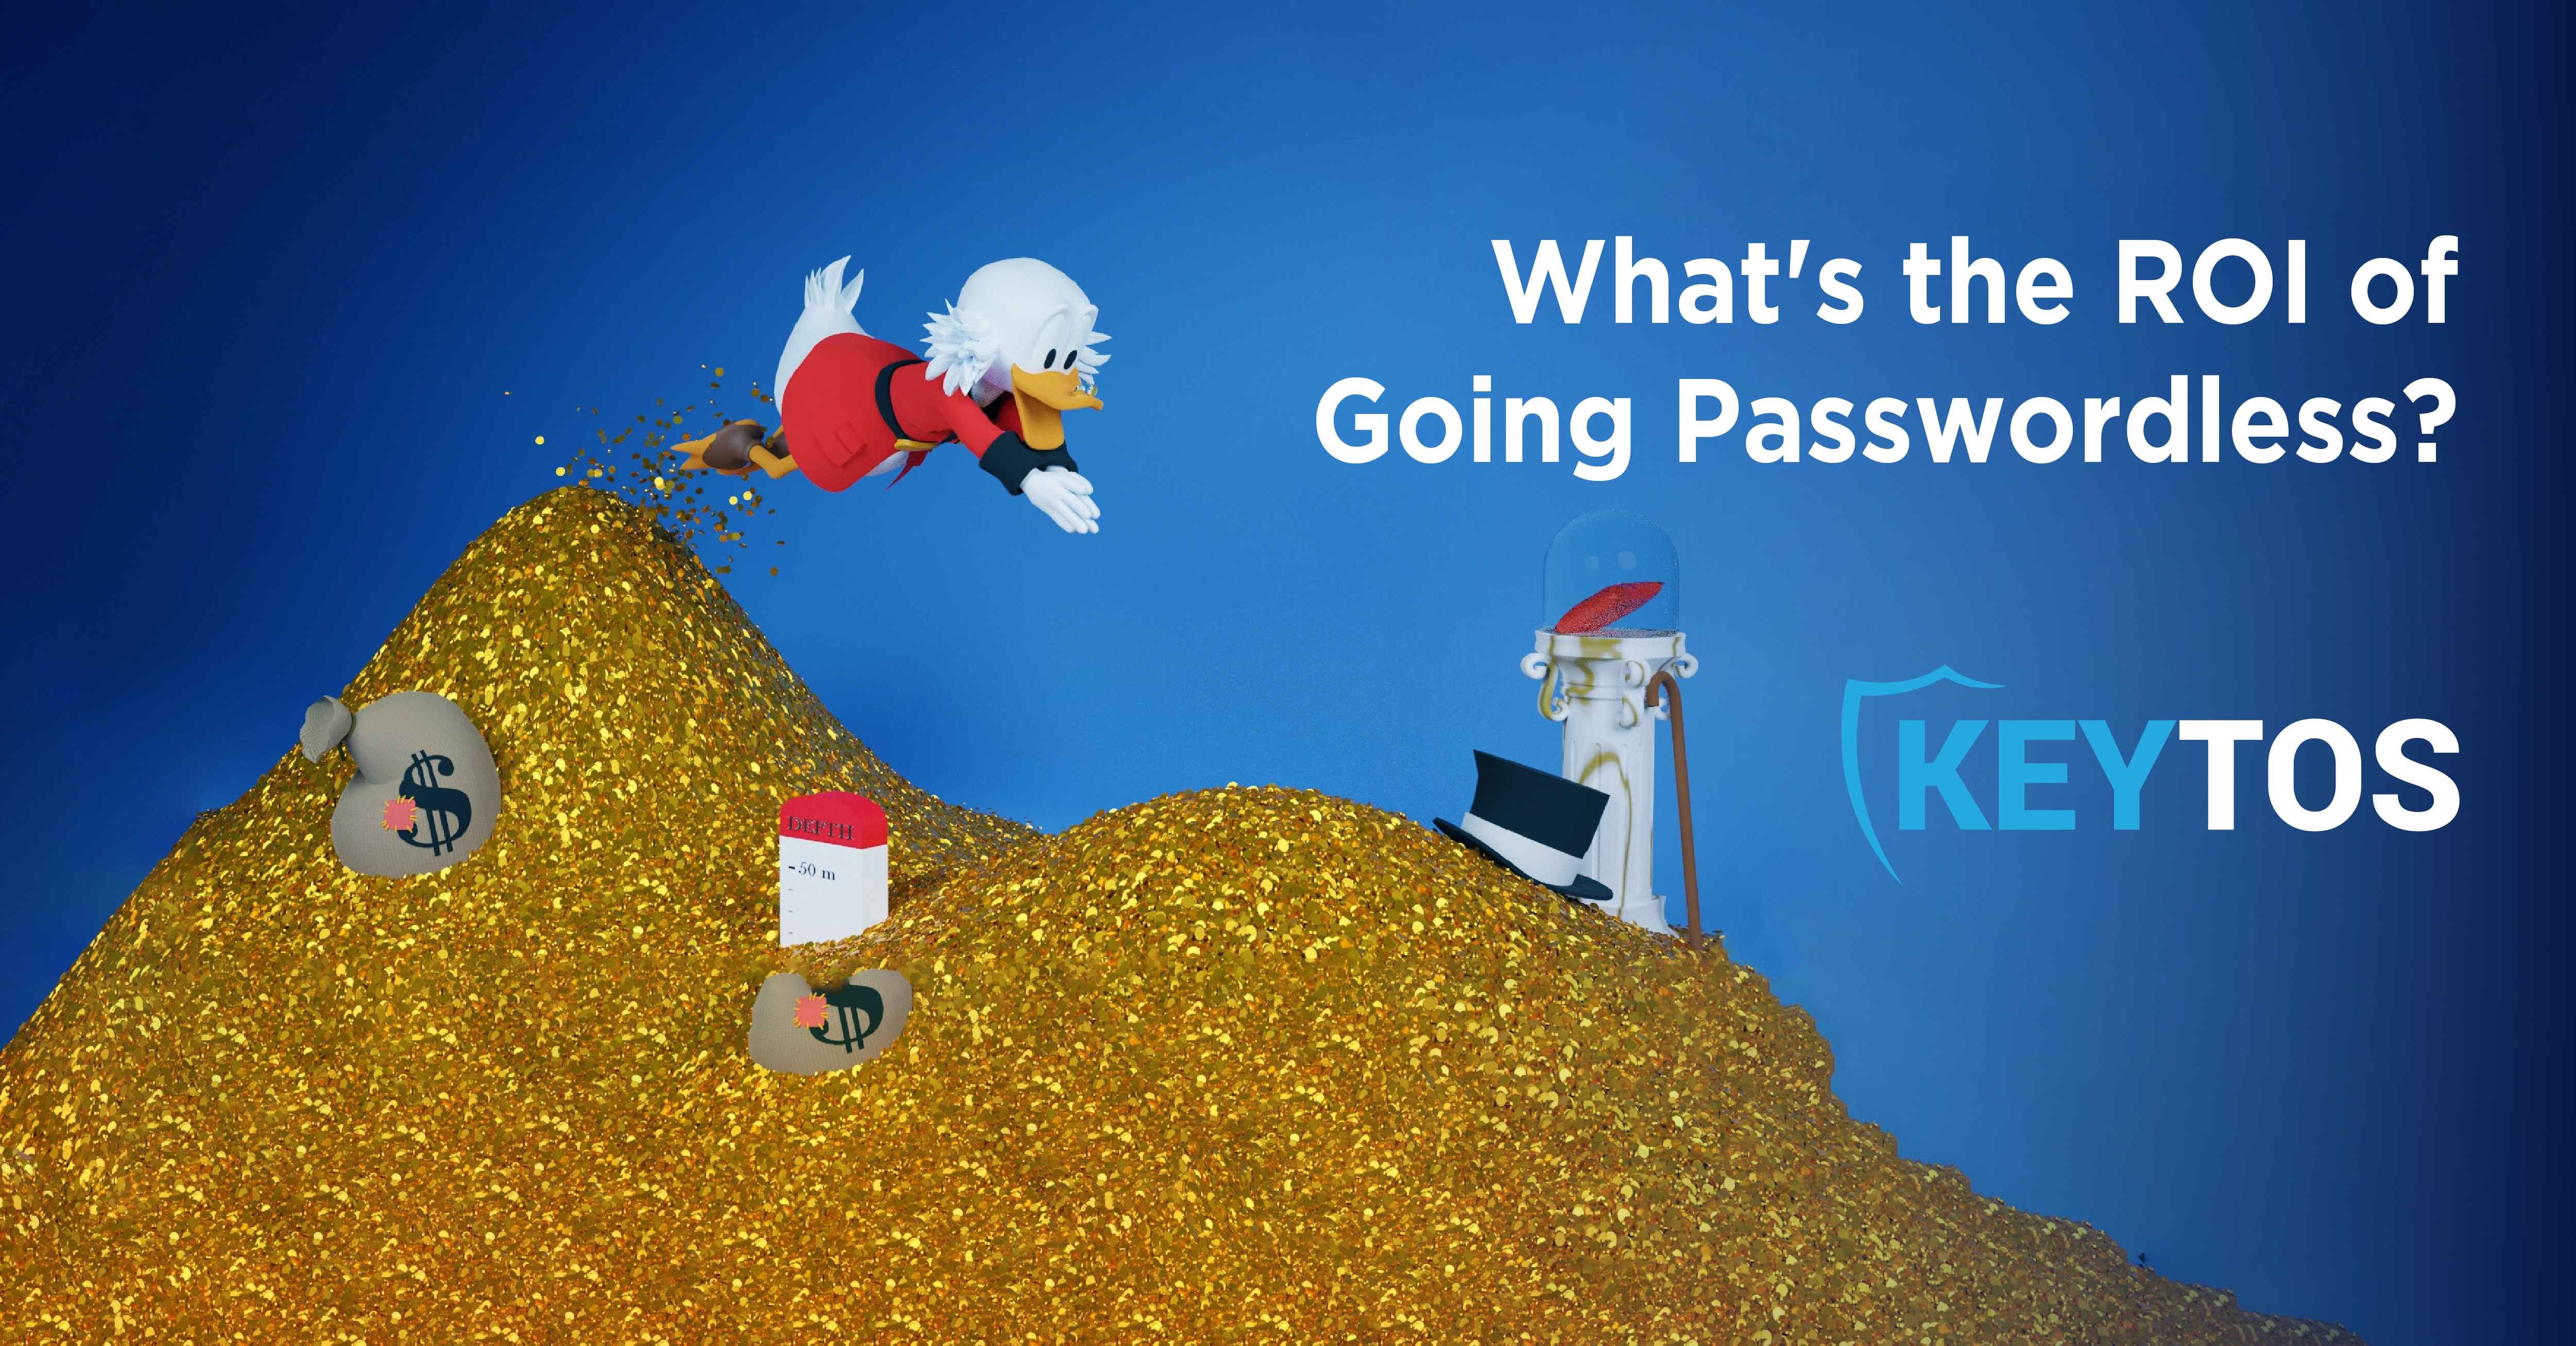 What is the ROI of Going Passwordless?